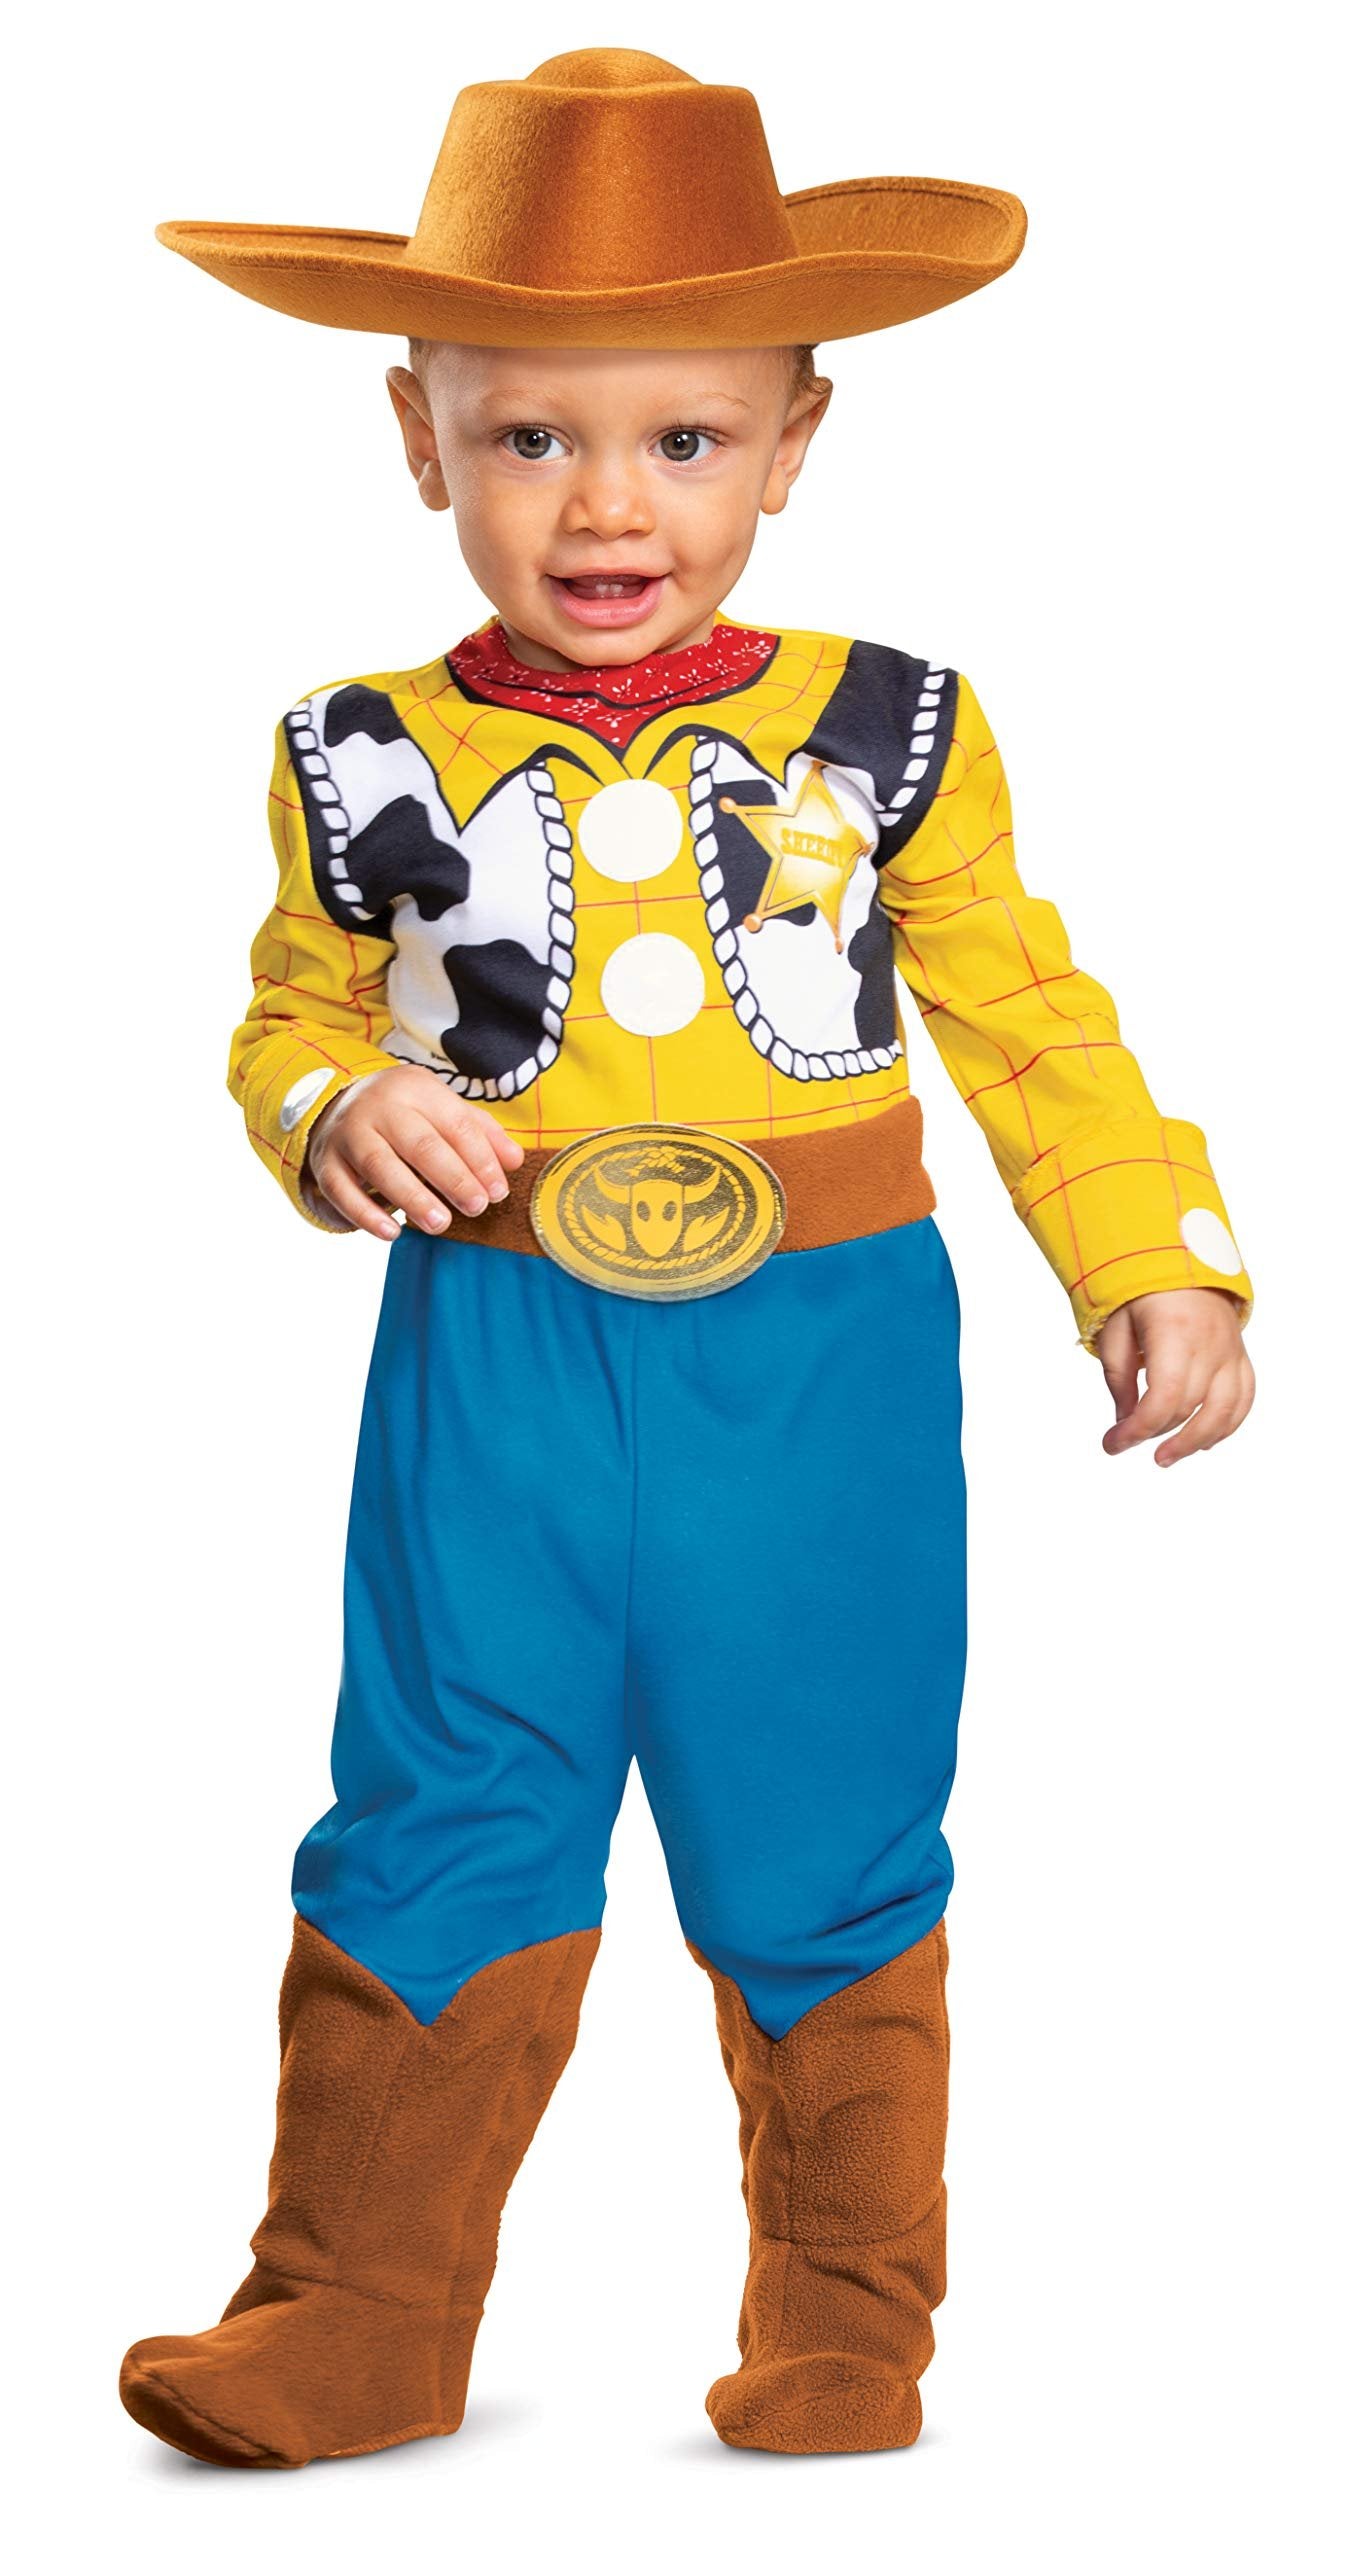 Disguise Baby Boys' Woody Deluxe Infant Costume, Multi, 6-12 Months